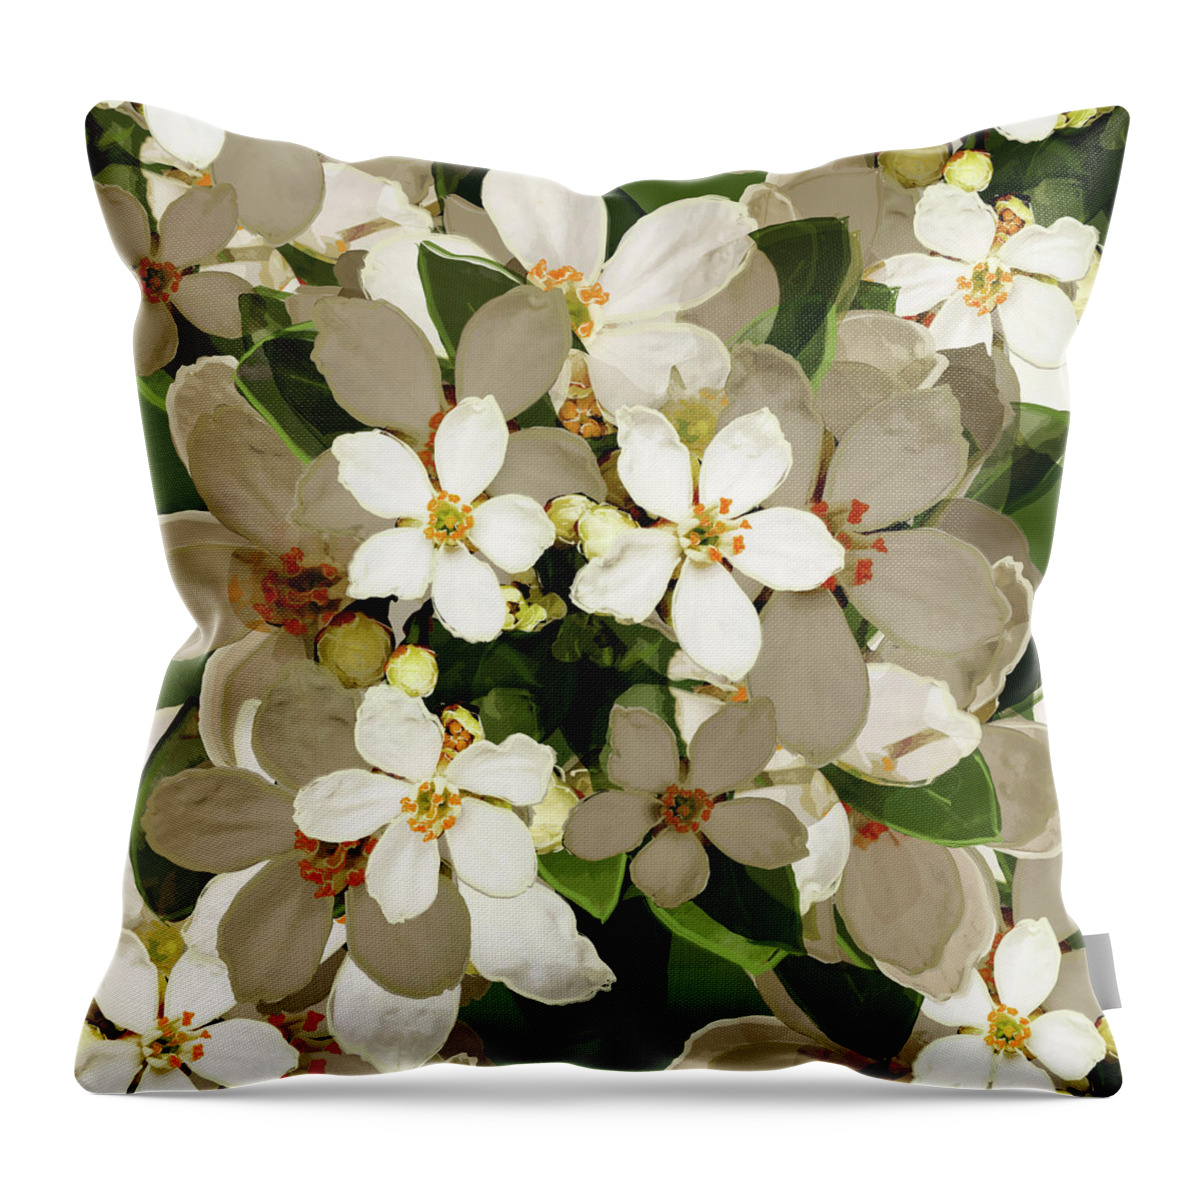 Daffodils Throw Pillow featuring the mixed media Blossom Flowers by BFA Prints